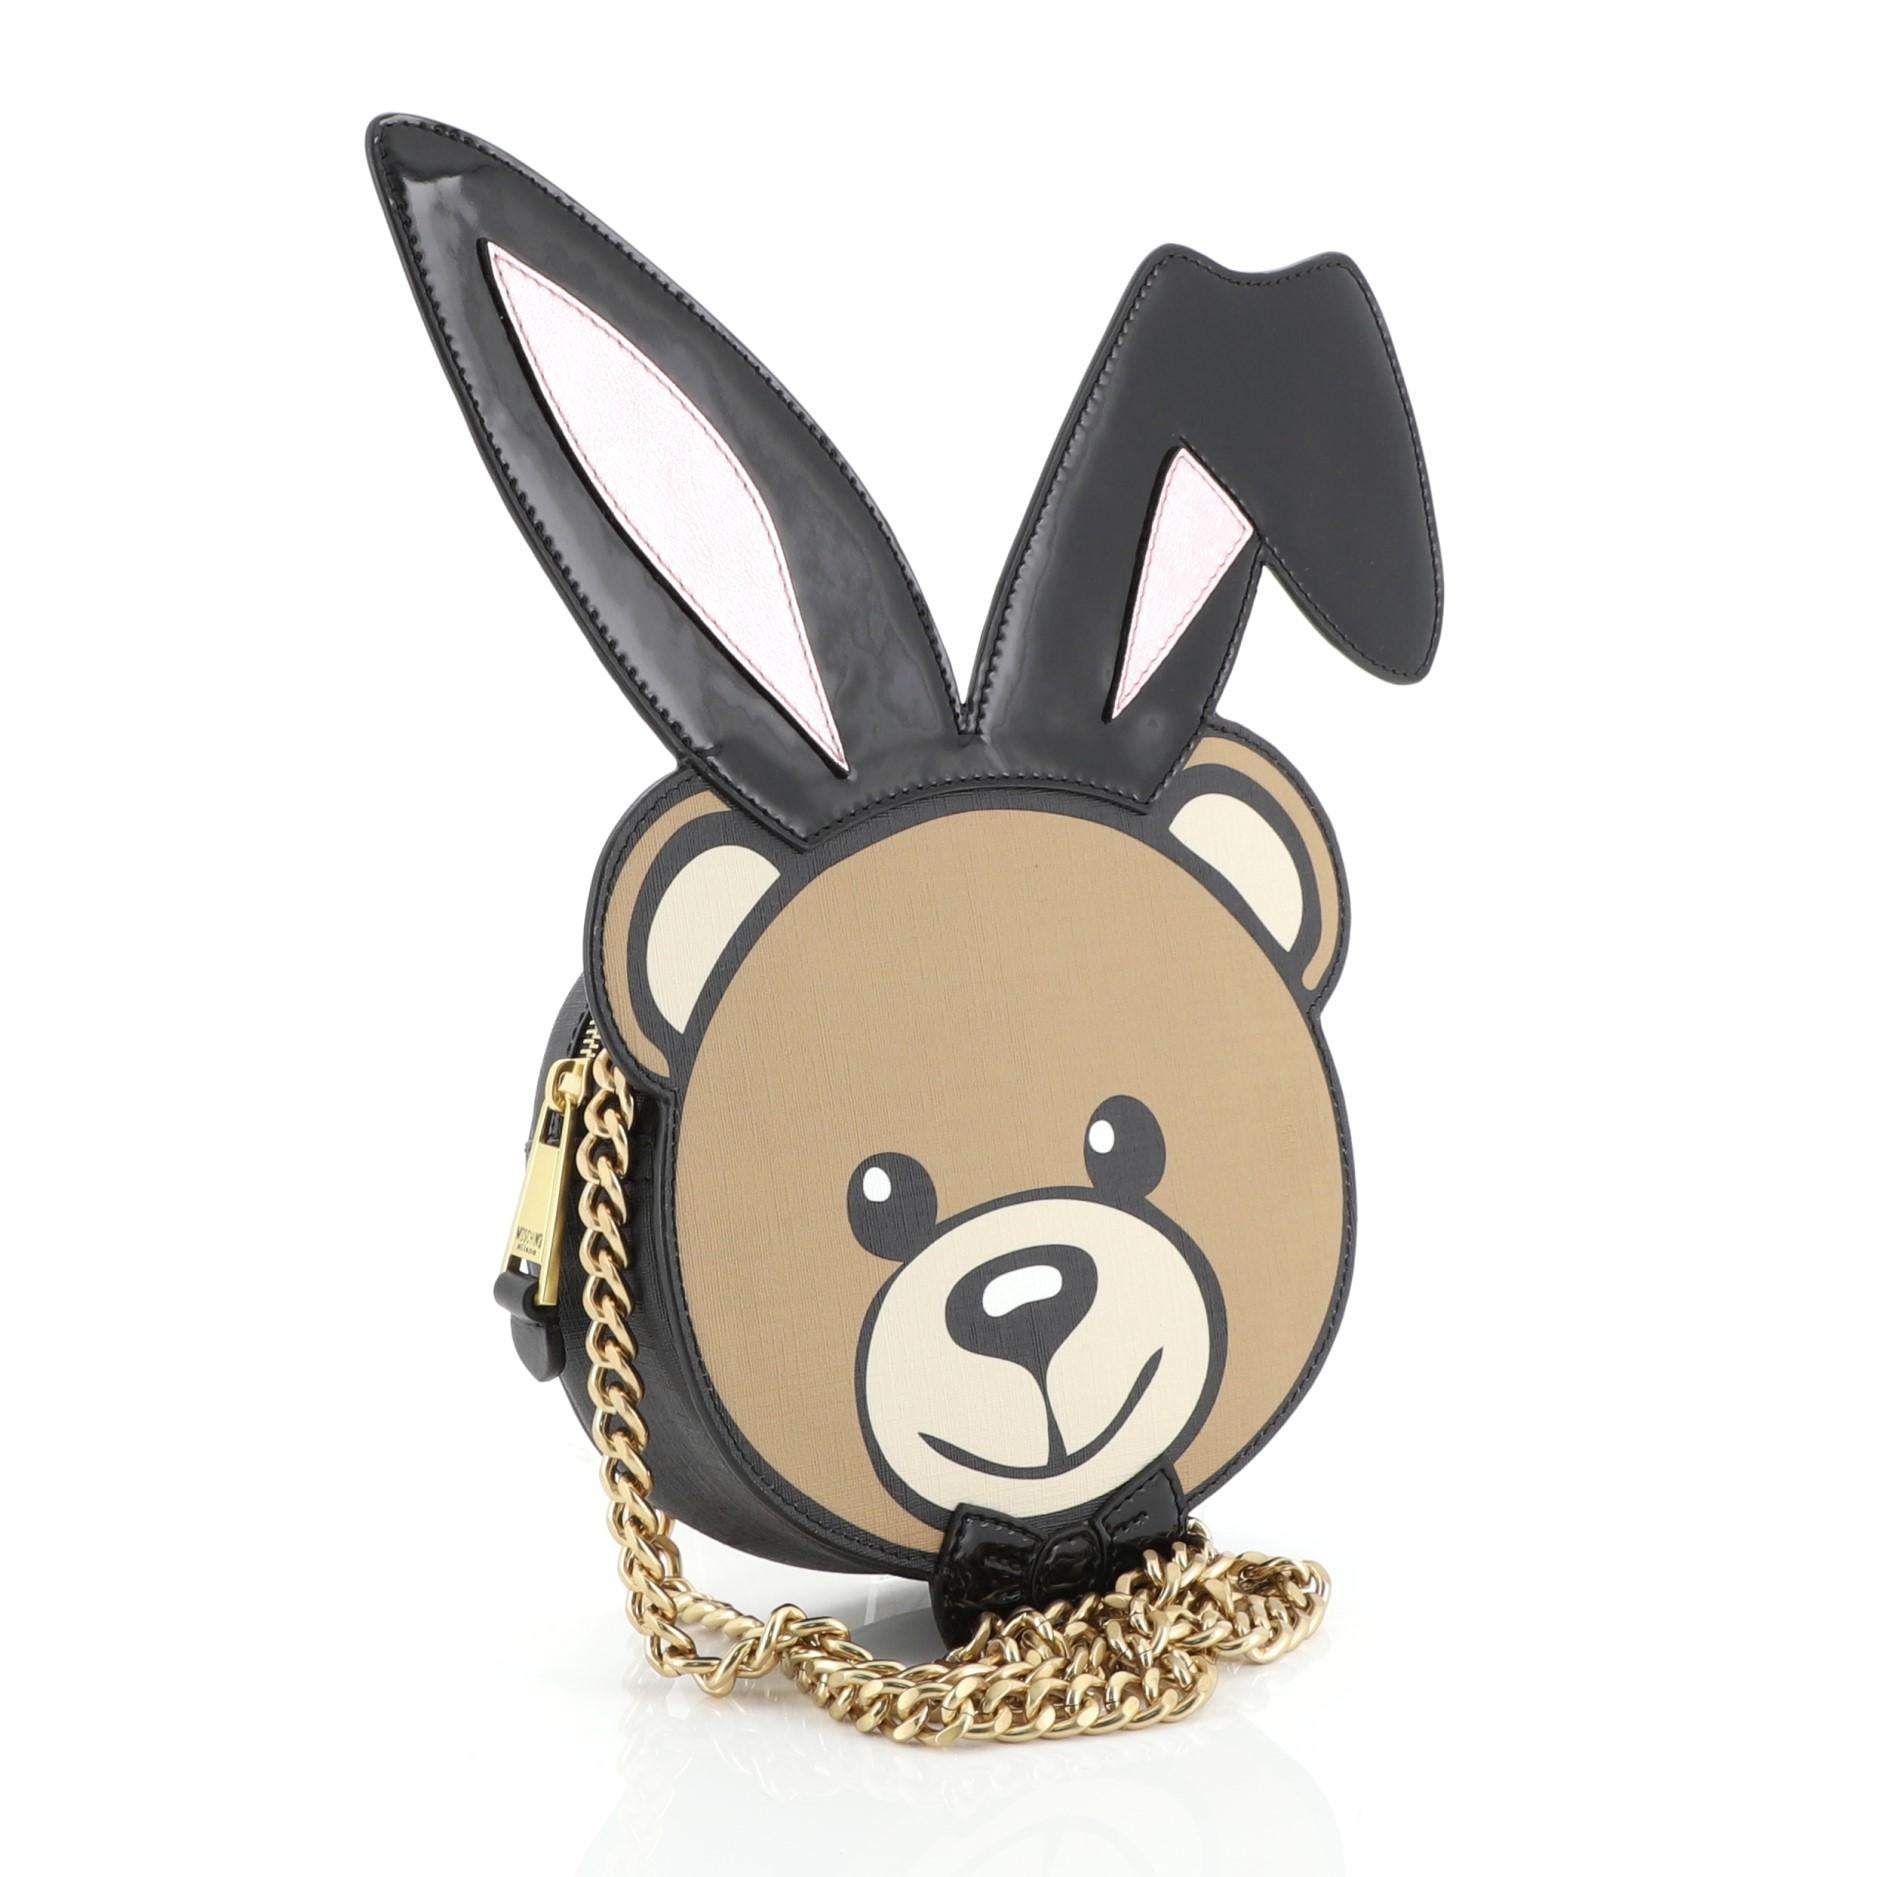 This Moschino Playboy Bear Chain Crossbody Bag Leather with Patent Small, crafted in neutral multicolor leather with black patent, features chain link strap, bear with playboy bunny ears design, and matte gold-tone hardware. Its zip closure opens to